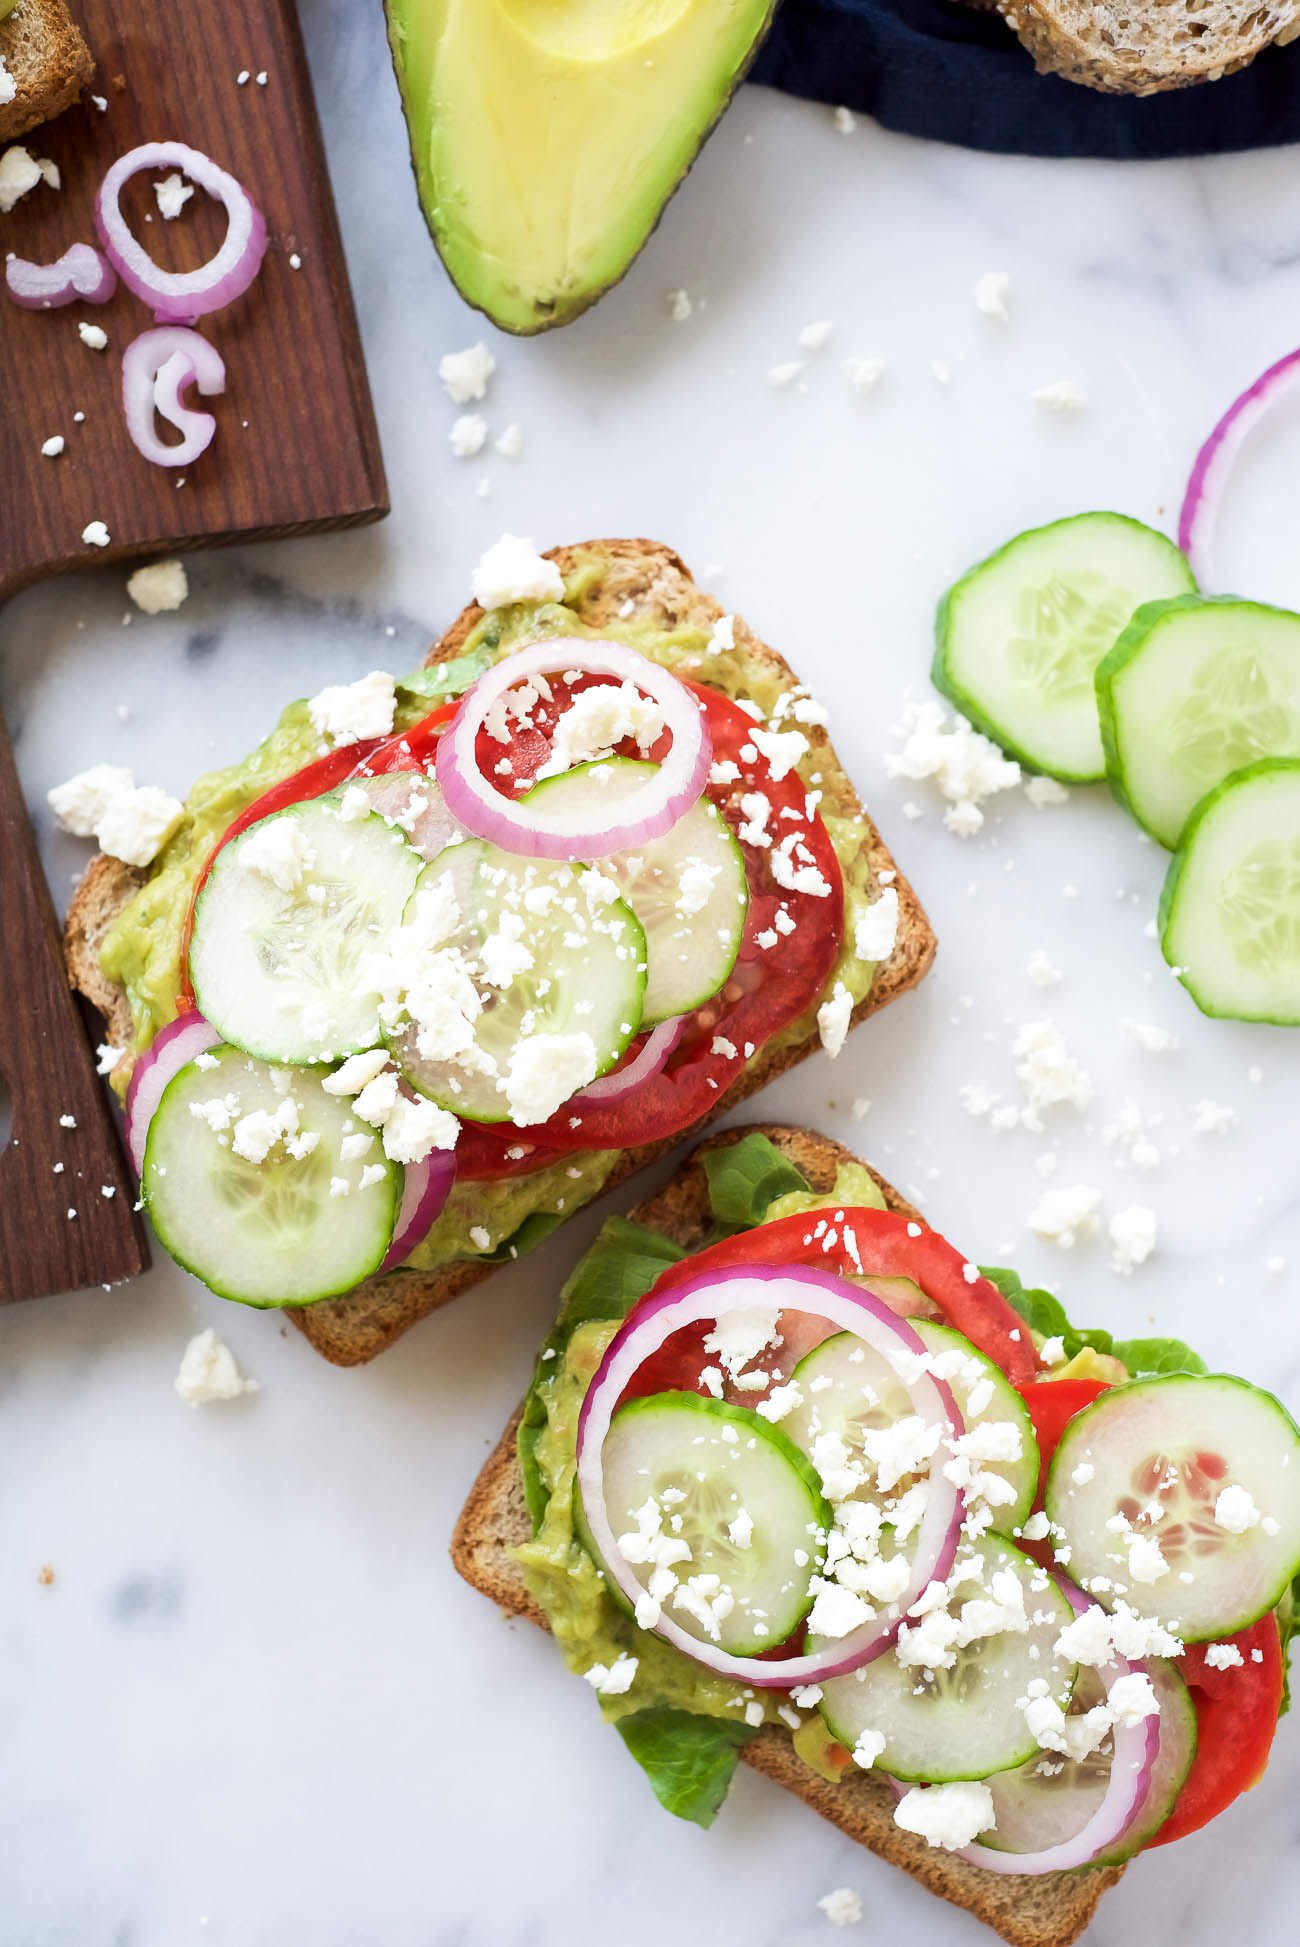 Mediterranean Avocado Toast is a spin off of my favorite veggie filled sandwich from Panera that satisfies both vegetarians and meat-lovers! A super quick and fresh, colorful sandwich - garden veggie filled guacamole, crispy cucumbers, red onions, juicy tomatoes and salty feta! 